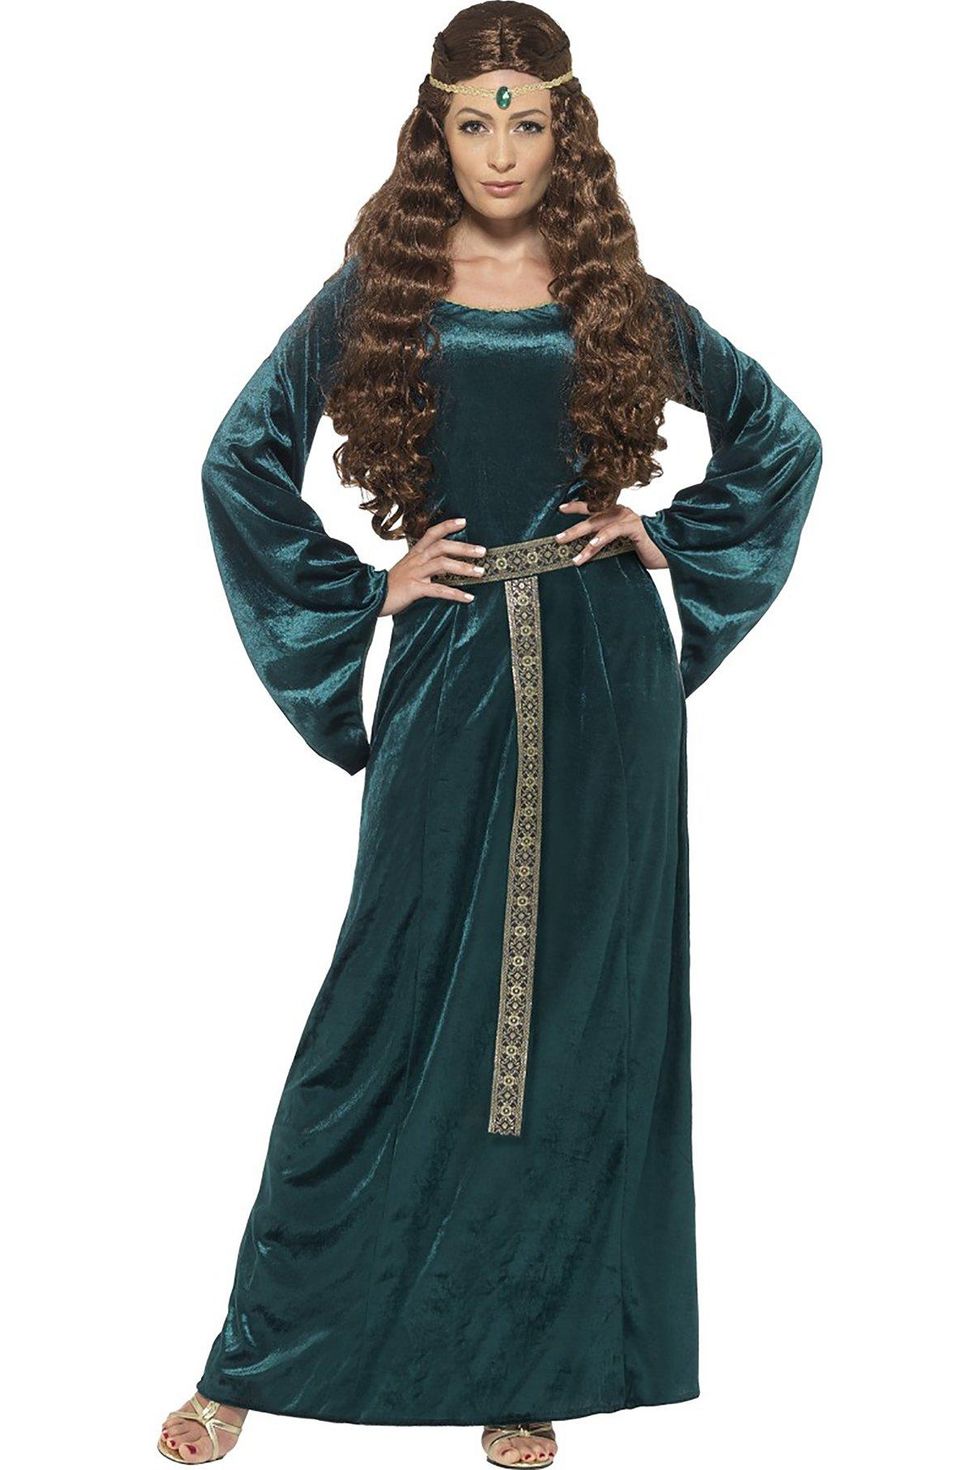 Medieval Maiden - Adults Costume